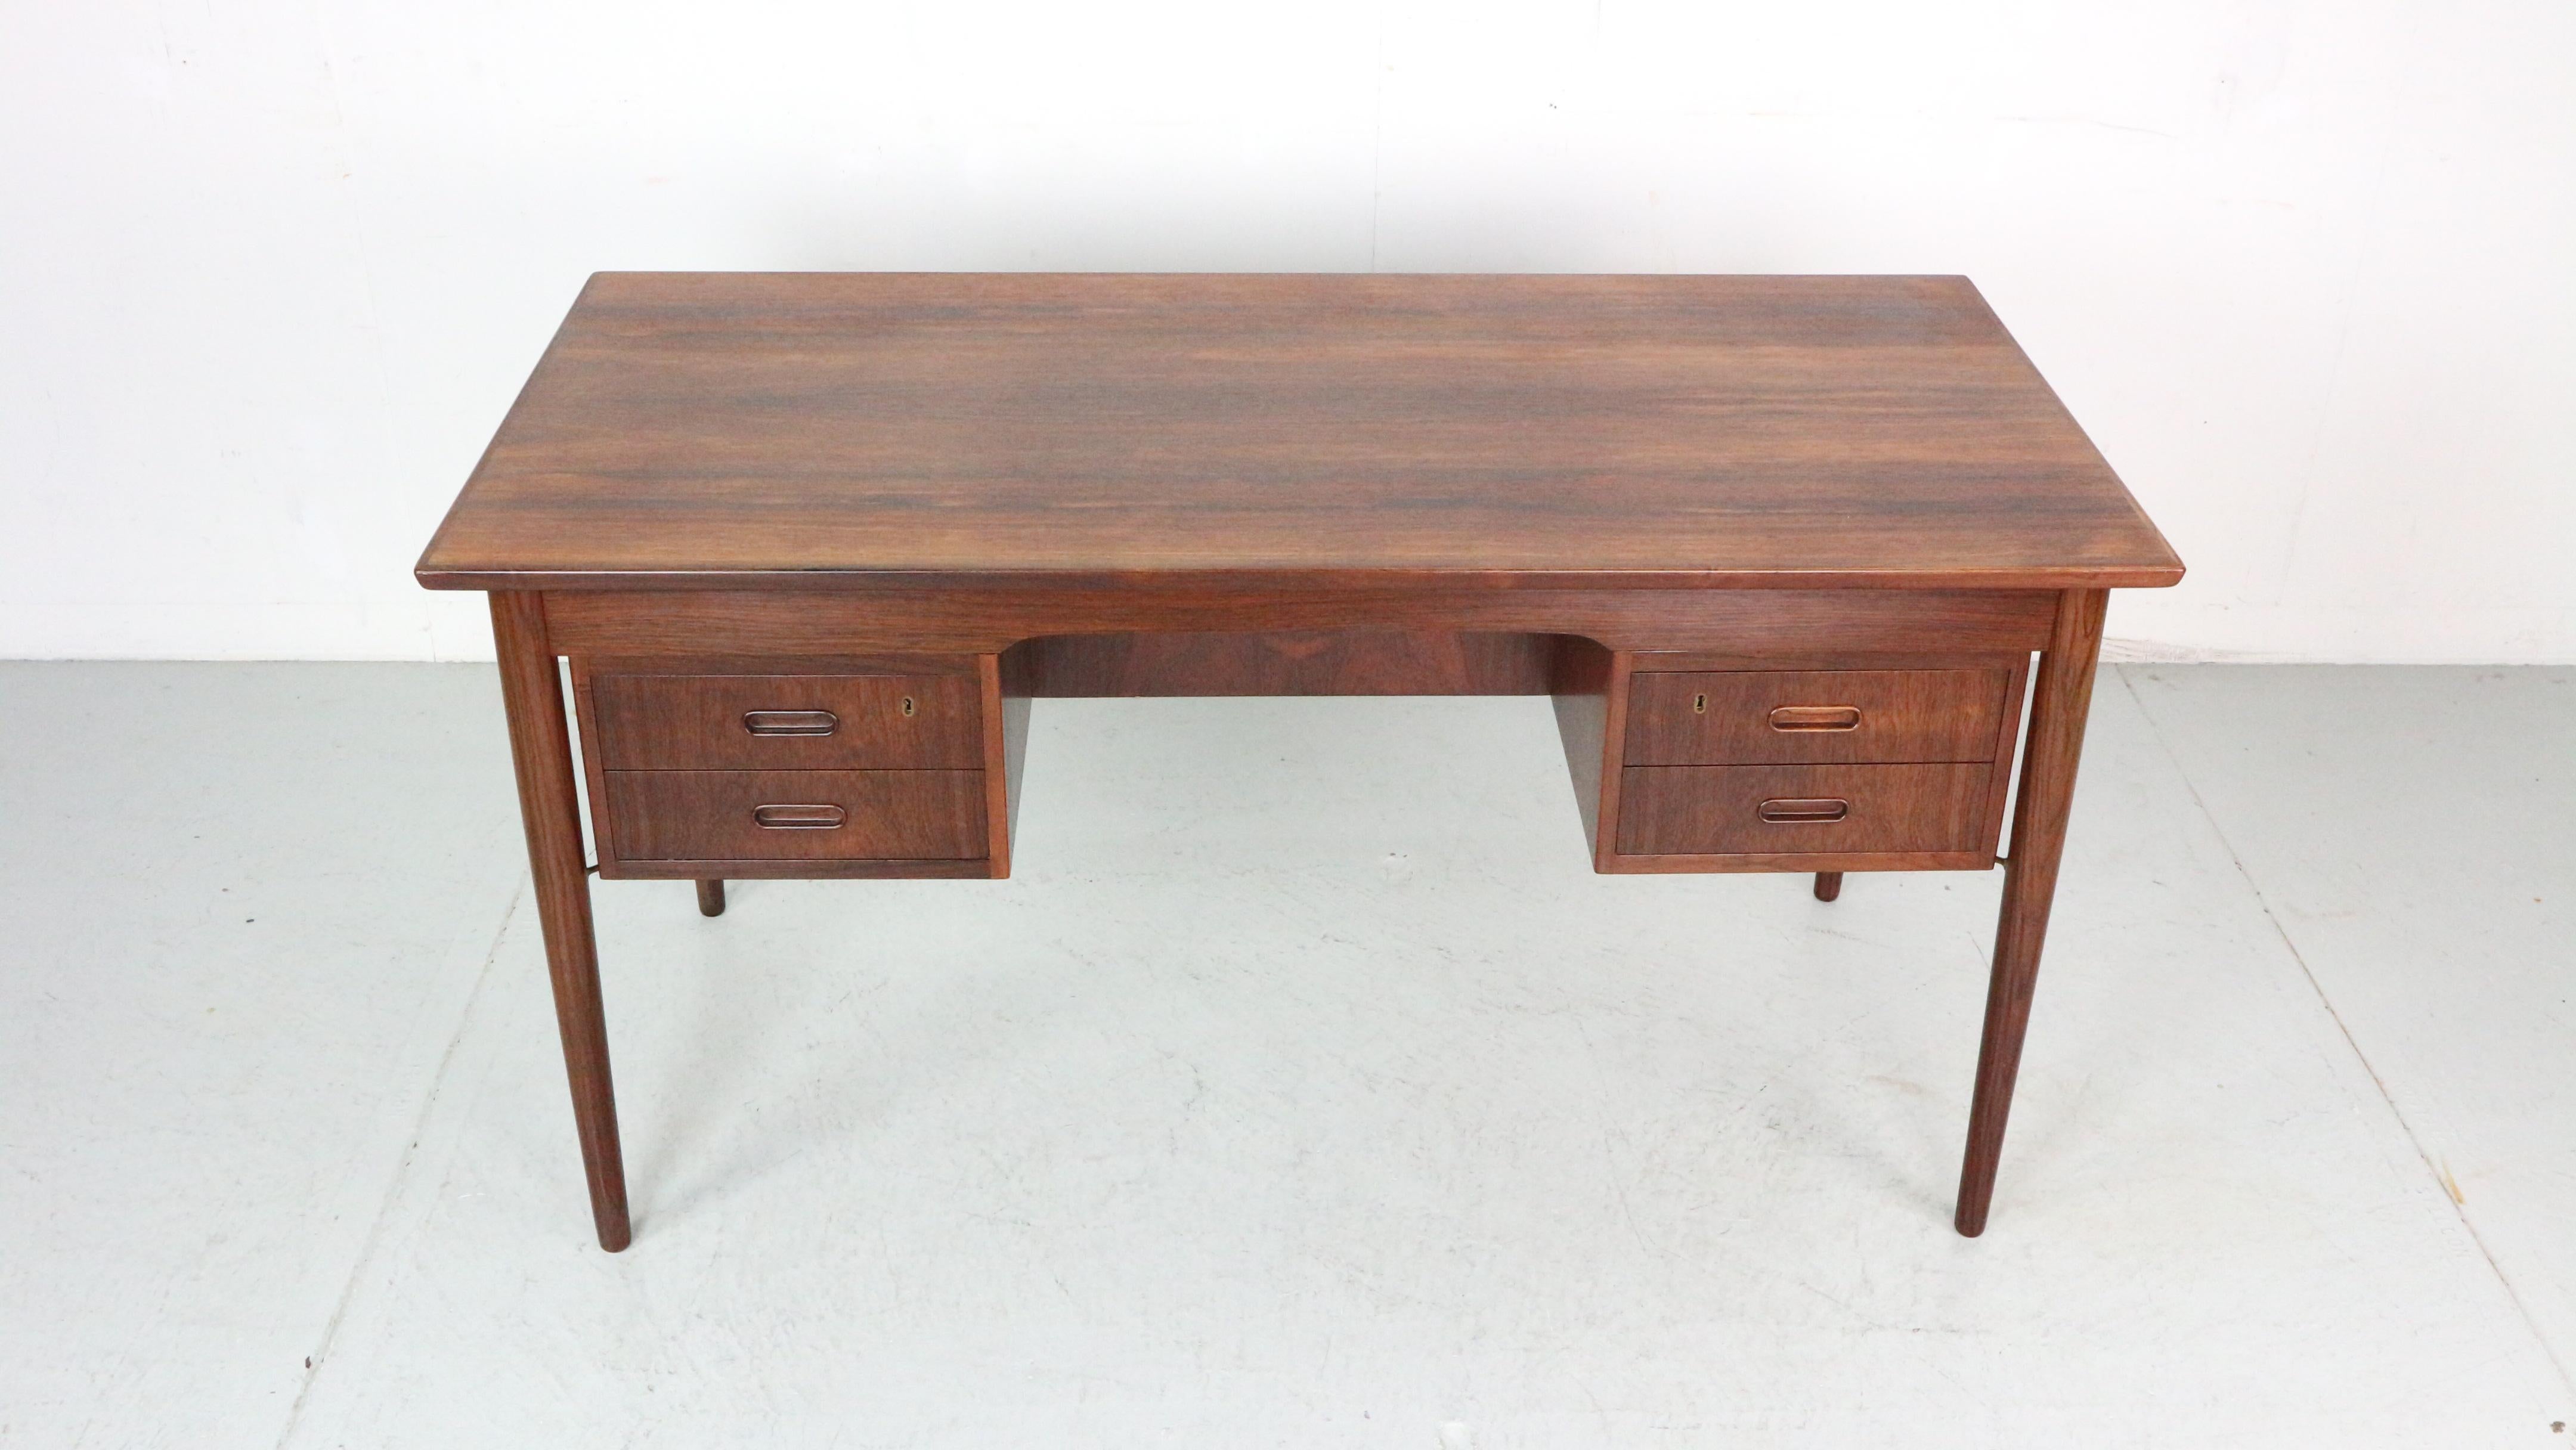 Midcentury Danish rosewood desk
A good quality Danish rosewood desk having four drawers to the front and open shelf to the back. Beautiful grain on the top and drawers on original key supplied.

No shipping outside of europe